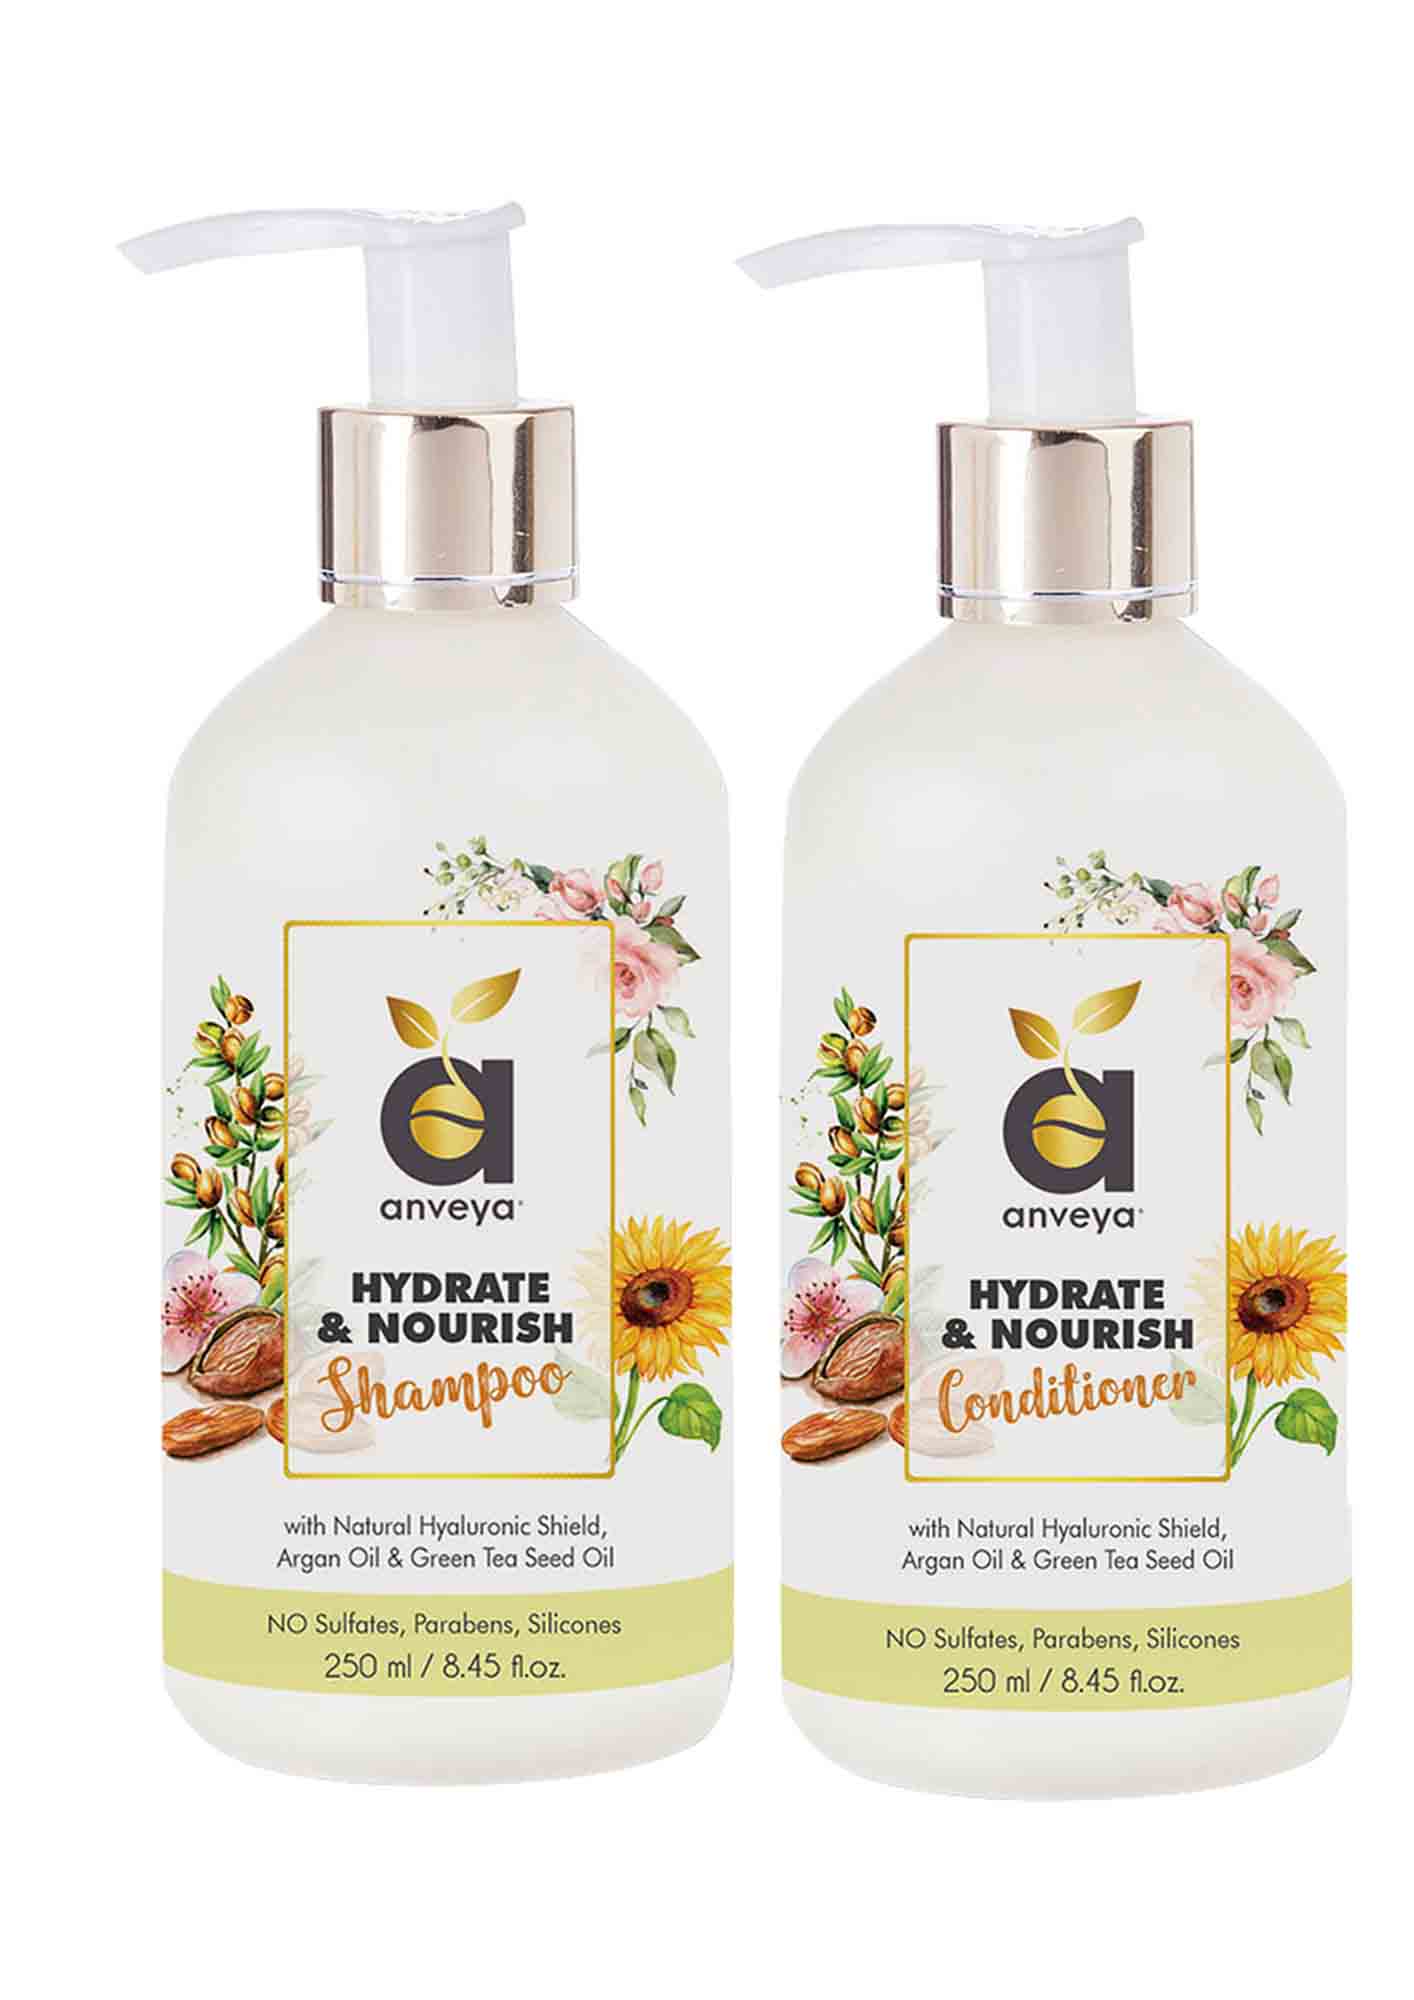 Anveya Hydrate & Nourish Shampoo & Conditioner Combo: For Dry, Damaged, Thinning Or Frizzy Hair